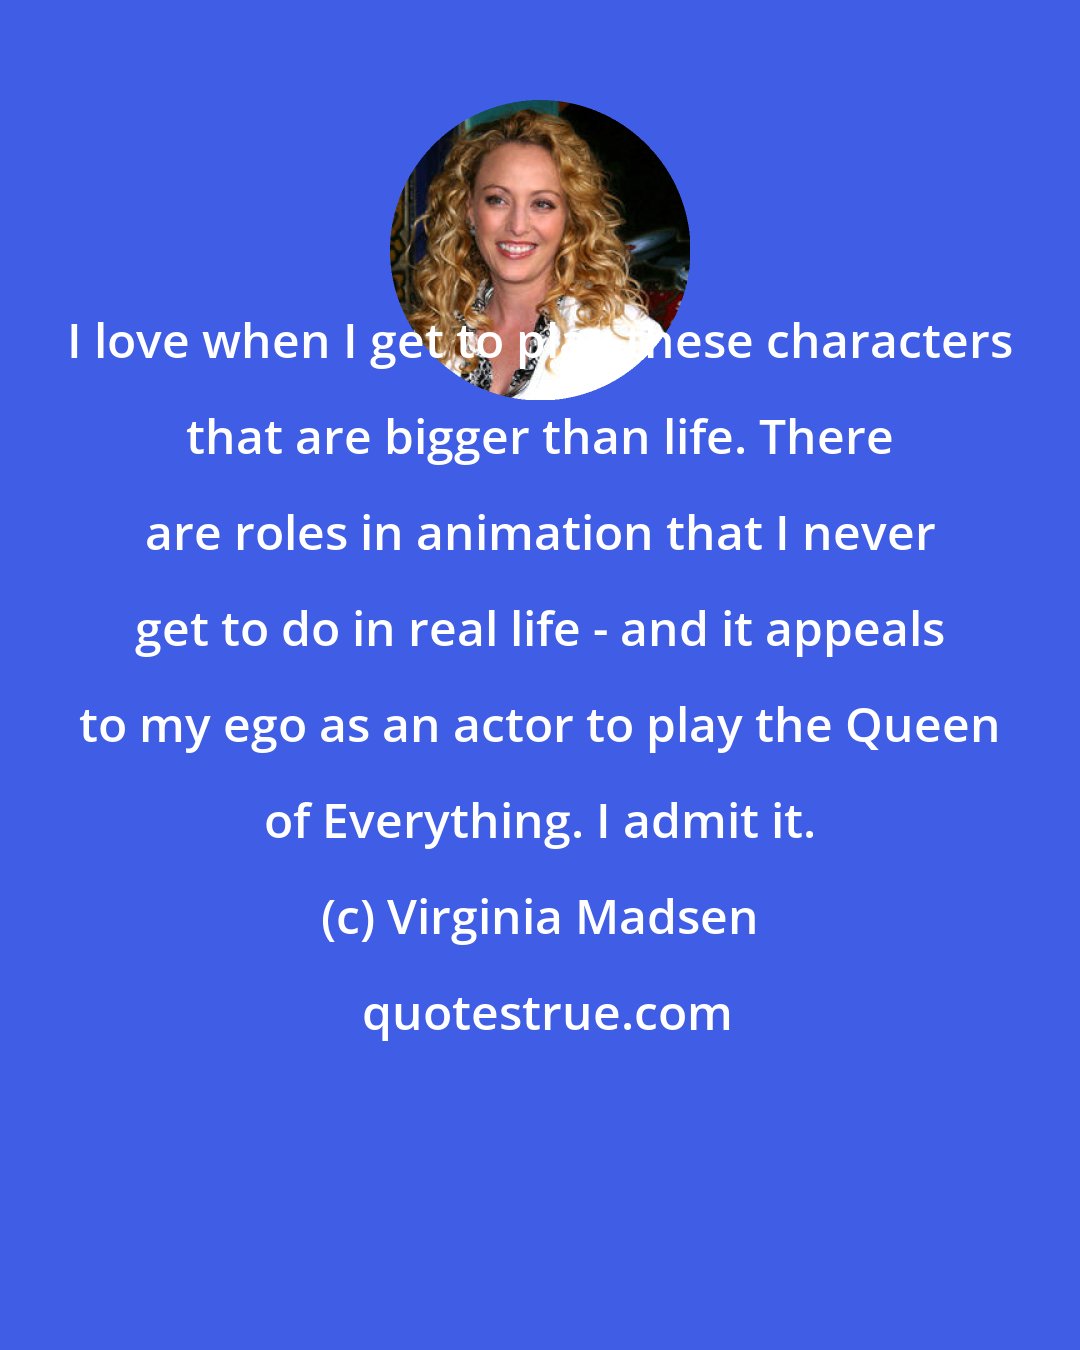 Virginia Madsen: I love when I get to play these characters that are bigger than life. There are roles in animation that I never get to do in real life - and it appeals to my ego as an actor to play the Queen of Everything. I admit it.